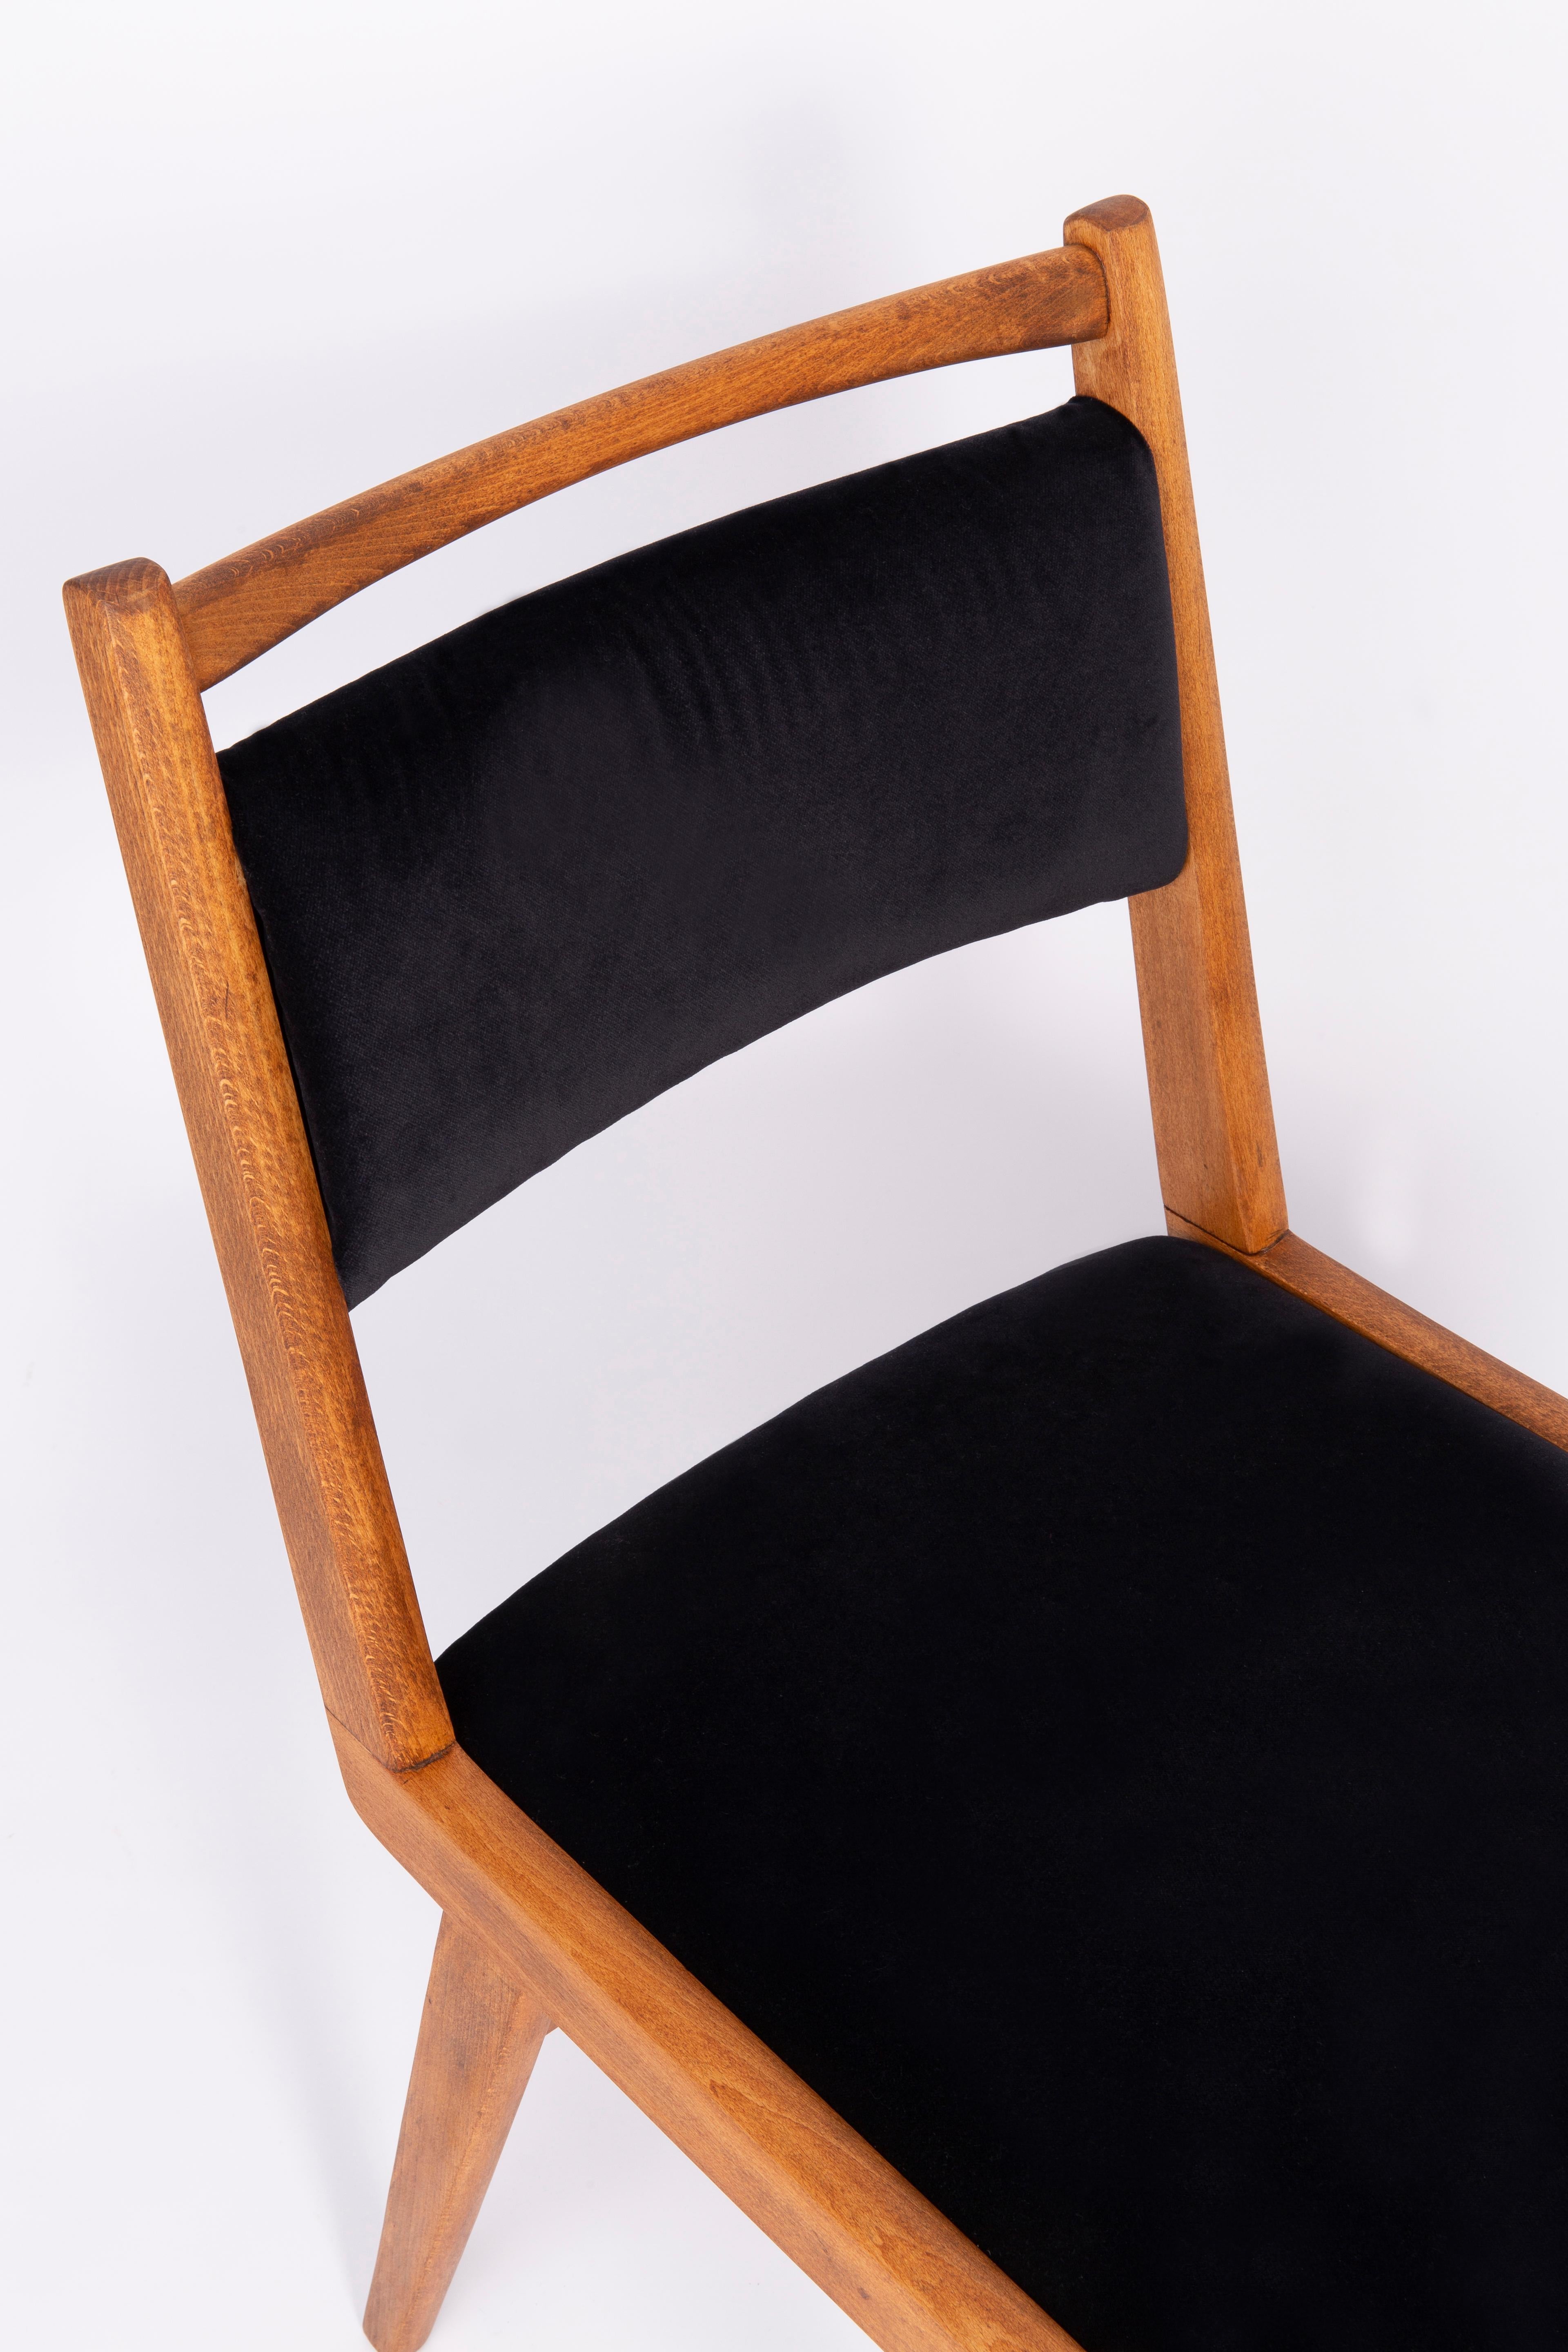 Chairs designed by Prof. Rajmund Halas. It is JAR type model. Made of beechwood. Chairs are after a complete upholstery renovation, the woodwork has been refreshed. Seat and back is dressed in a black and white, durable and pleasant to the touch